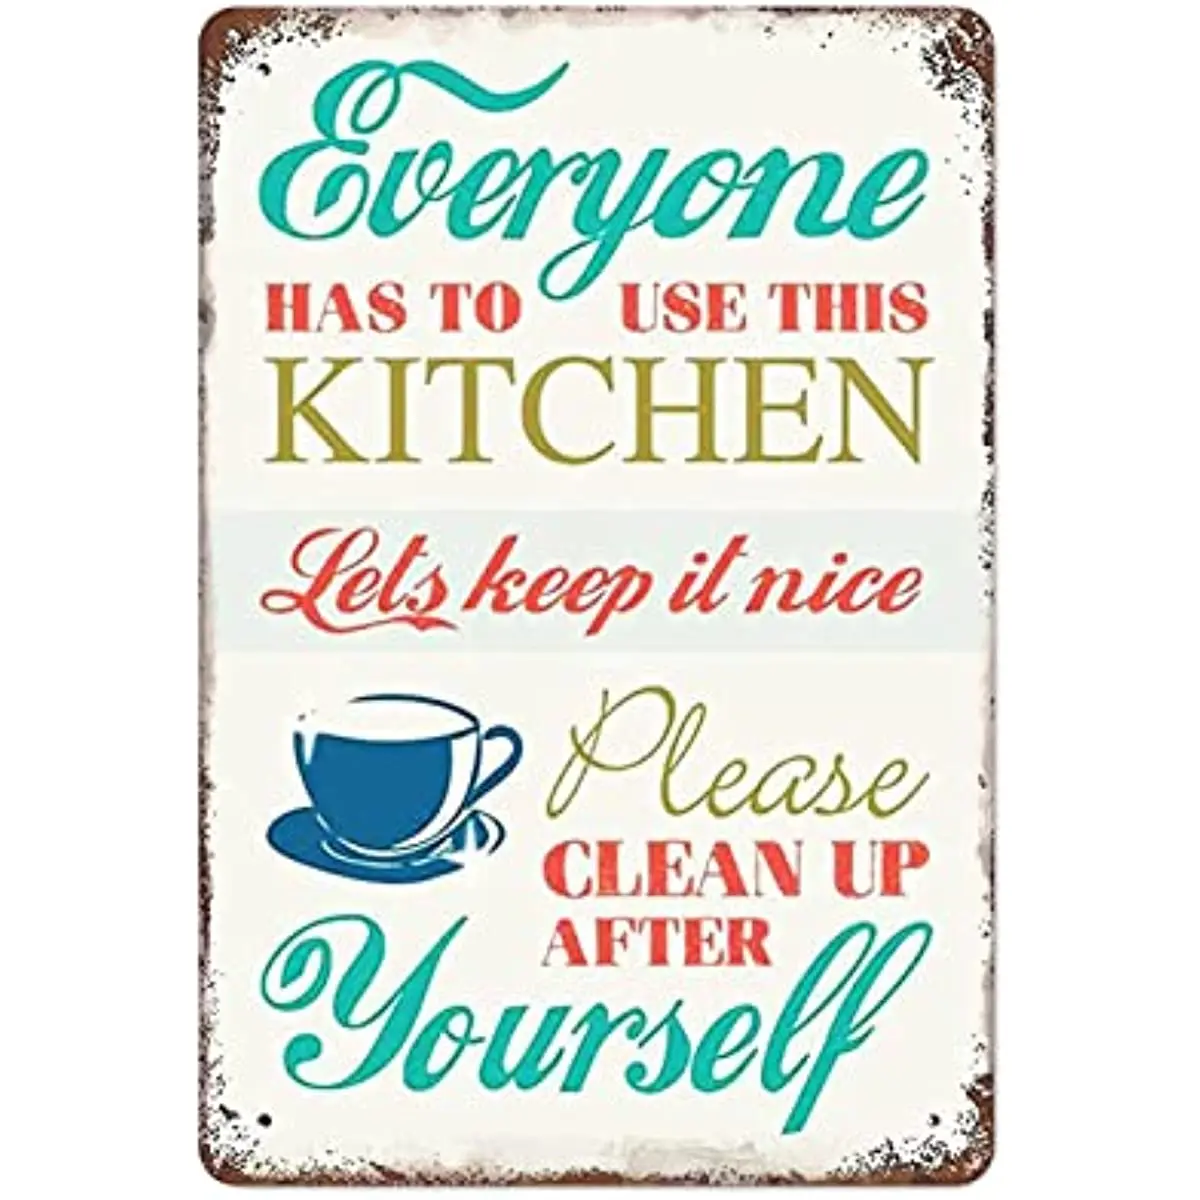 

New Metal Tin Sign Vintage Plaques Everyone Has Use This Lets Keep It Nice Clean Up After Yourself Decro X8Inch for Home